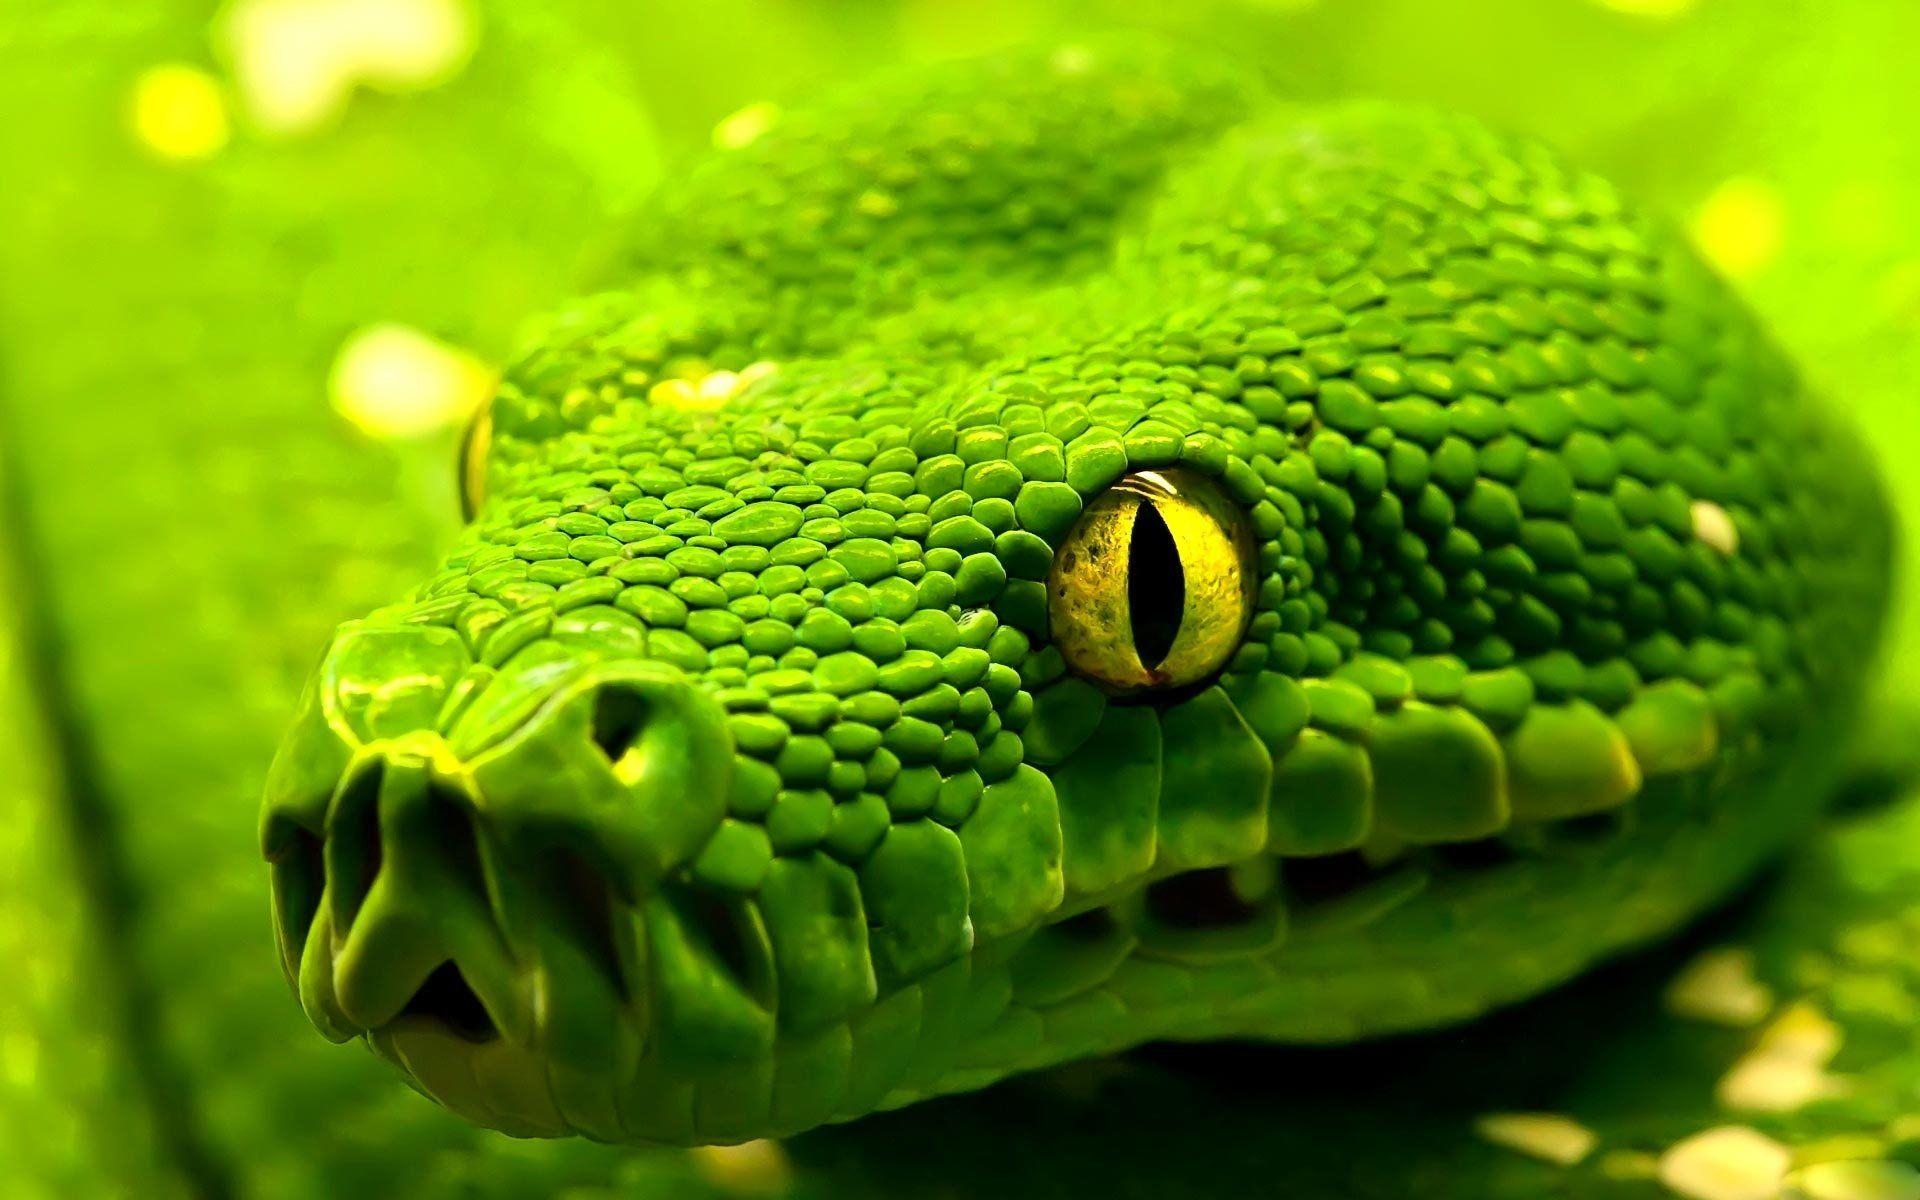 Reptile Photos Download The BEST Free Reptile Stock Photos  HD Images